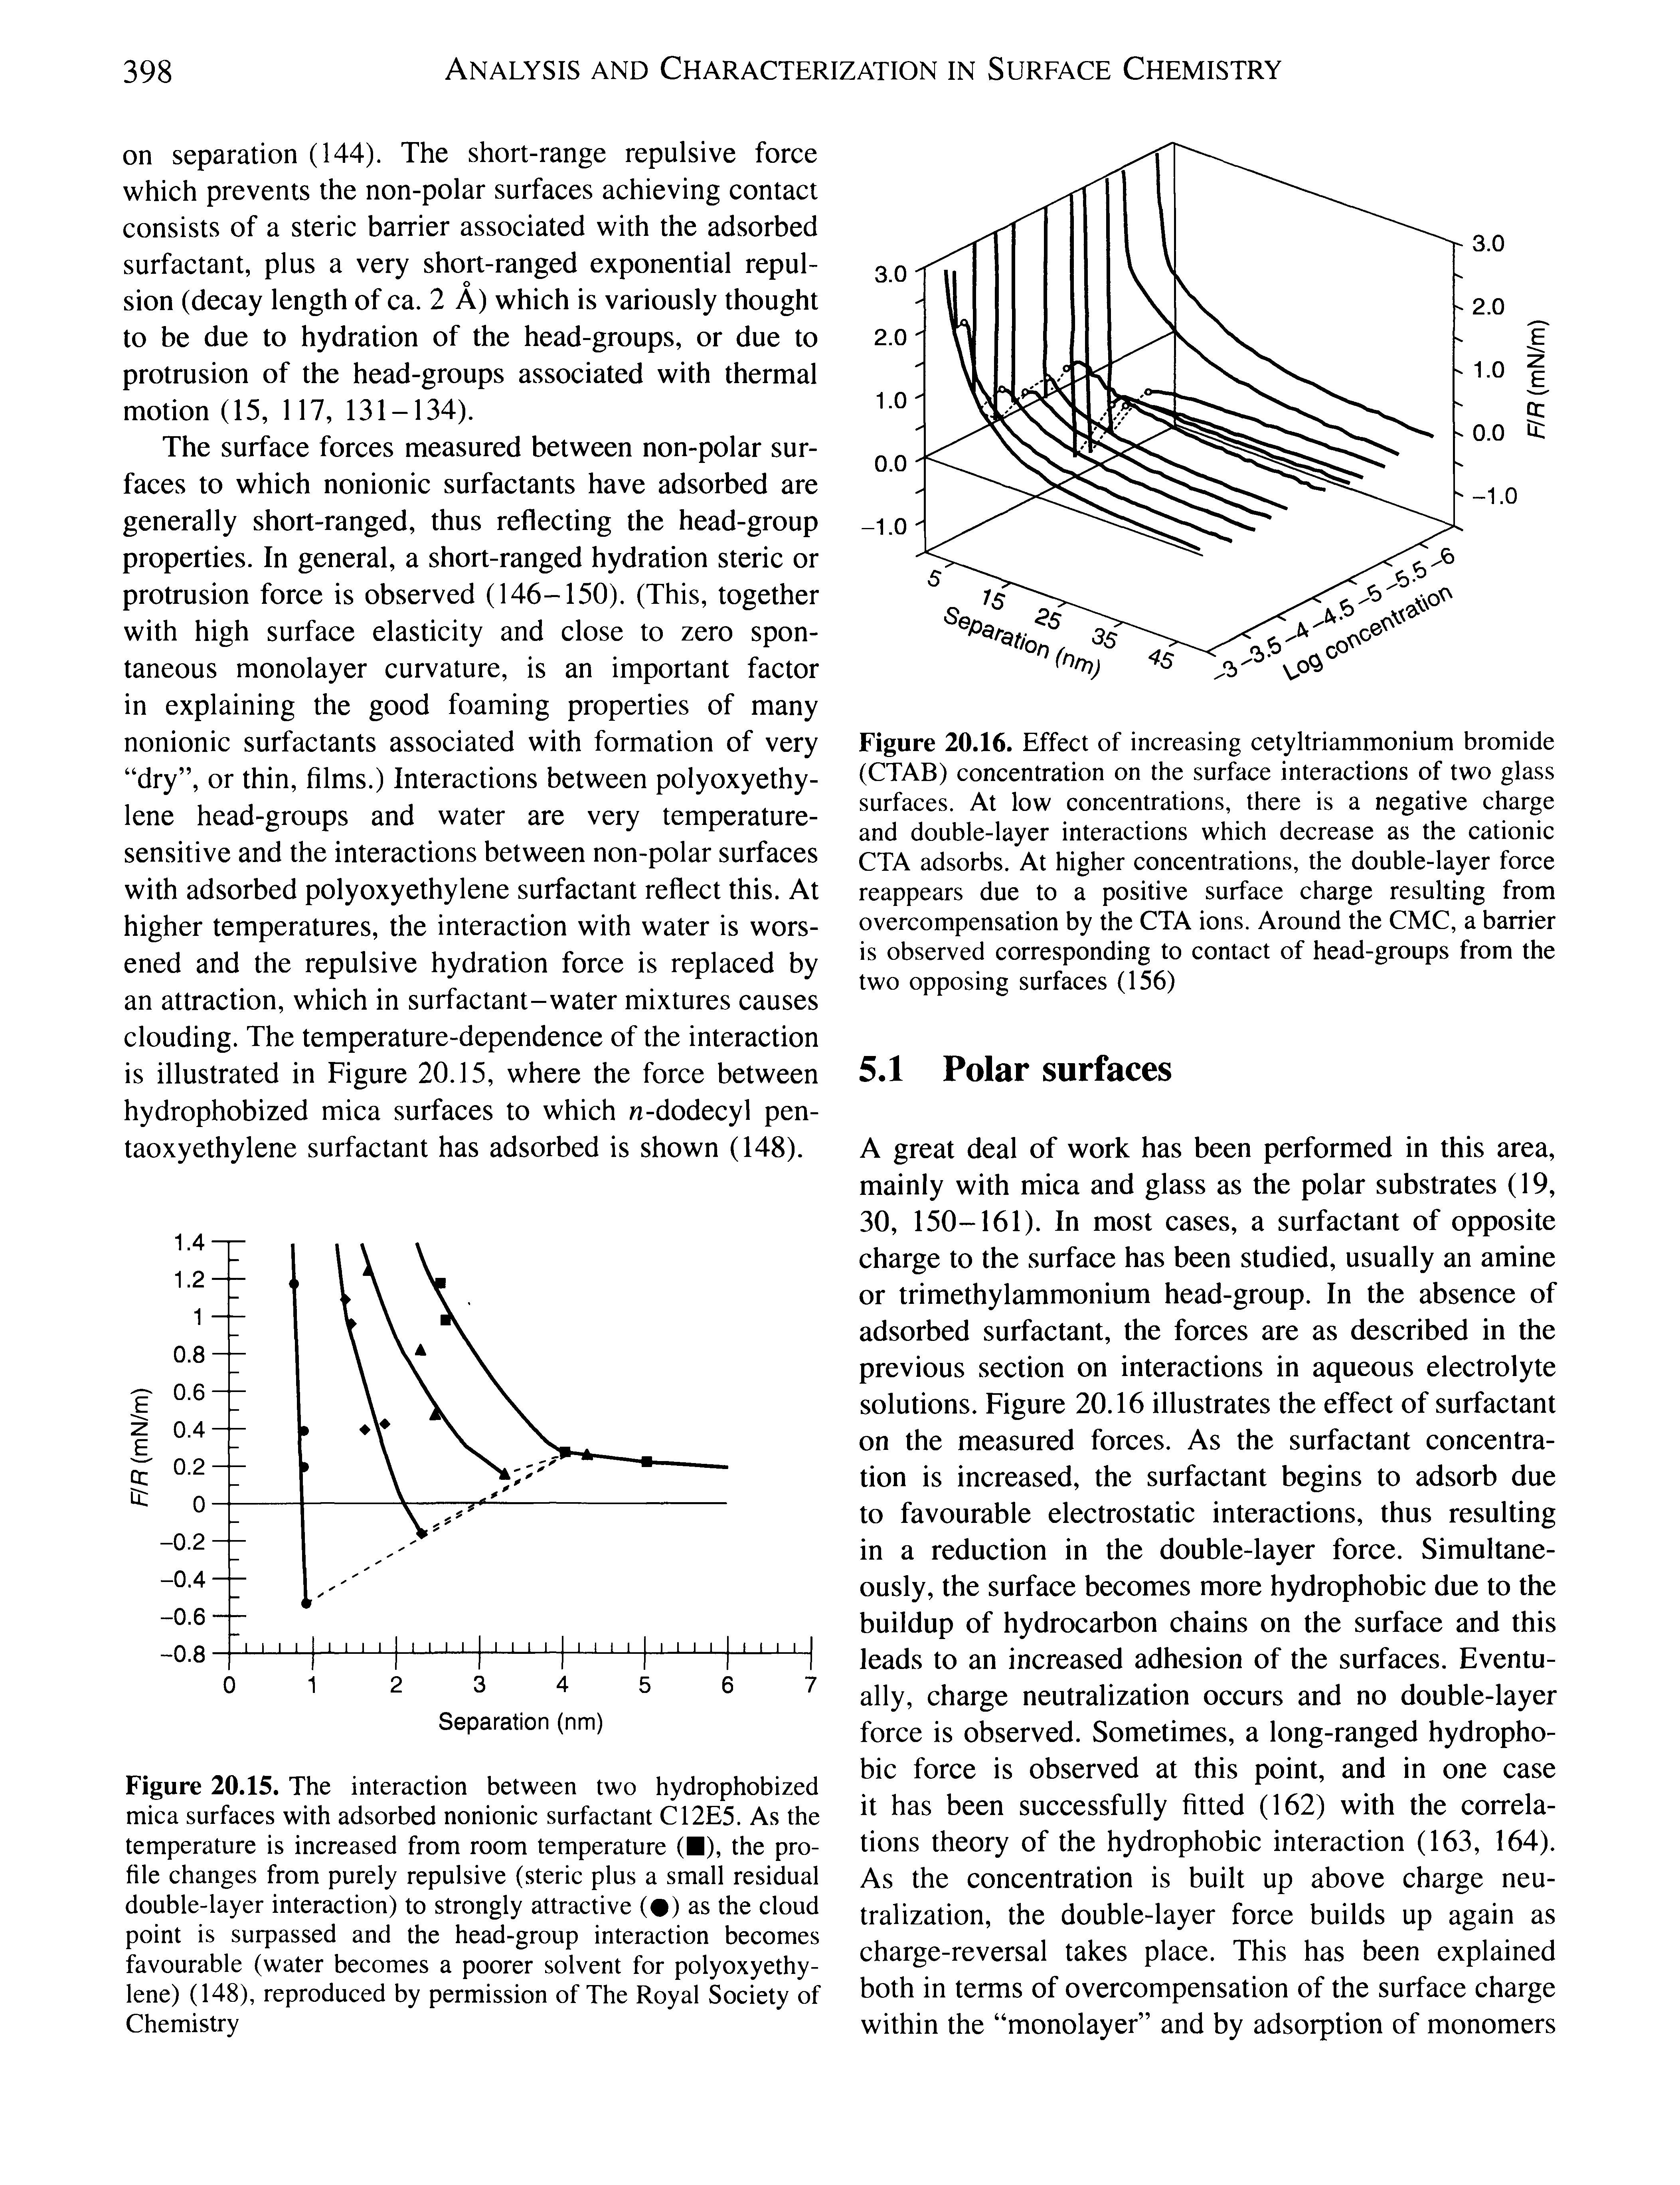 Figure 20.15. The interaction between two hydrophobized mica surfaces with adsorbed nonionic surfactant C12E5. As the temperature is increased from room temperature ( ), the profile changes from purely repulsive (steric plus a small residual double-layer interaction) to strongly attractive ( ) as the cloud point is surpassed and the head-group interaction becomes favourable (water becomes a poorer solvent for polyoxyethylene) (148), reproduced by permission of The Royal Society of Chemistry...